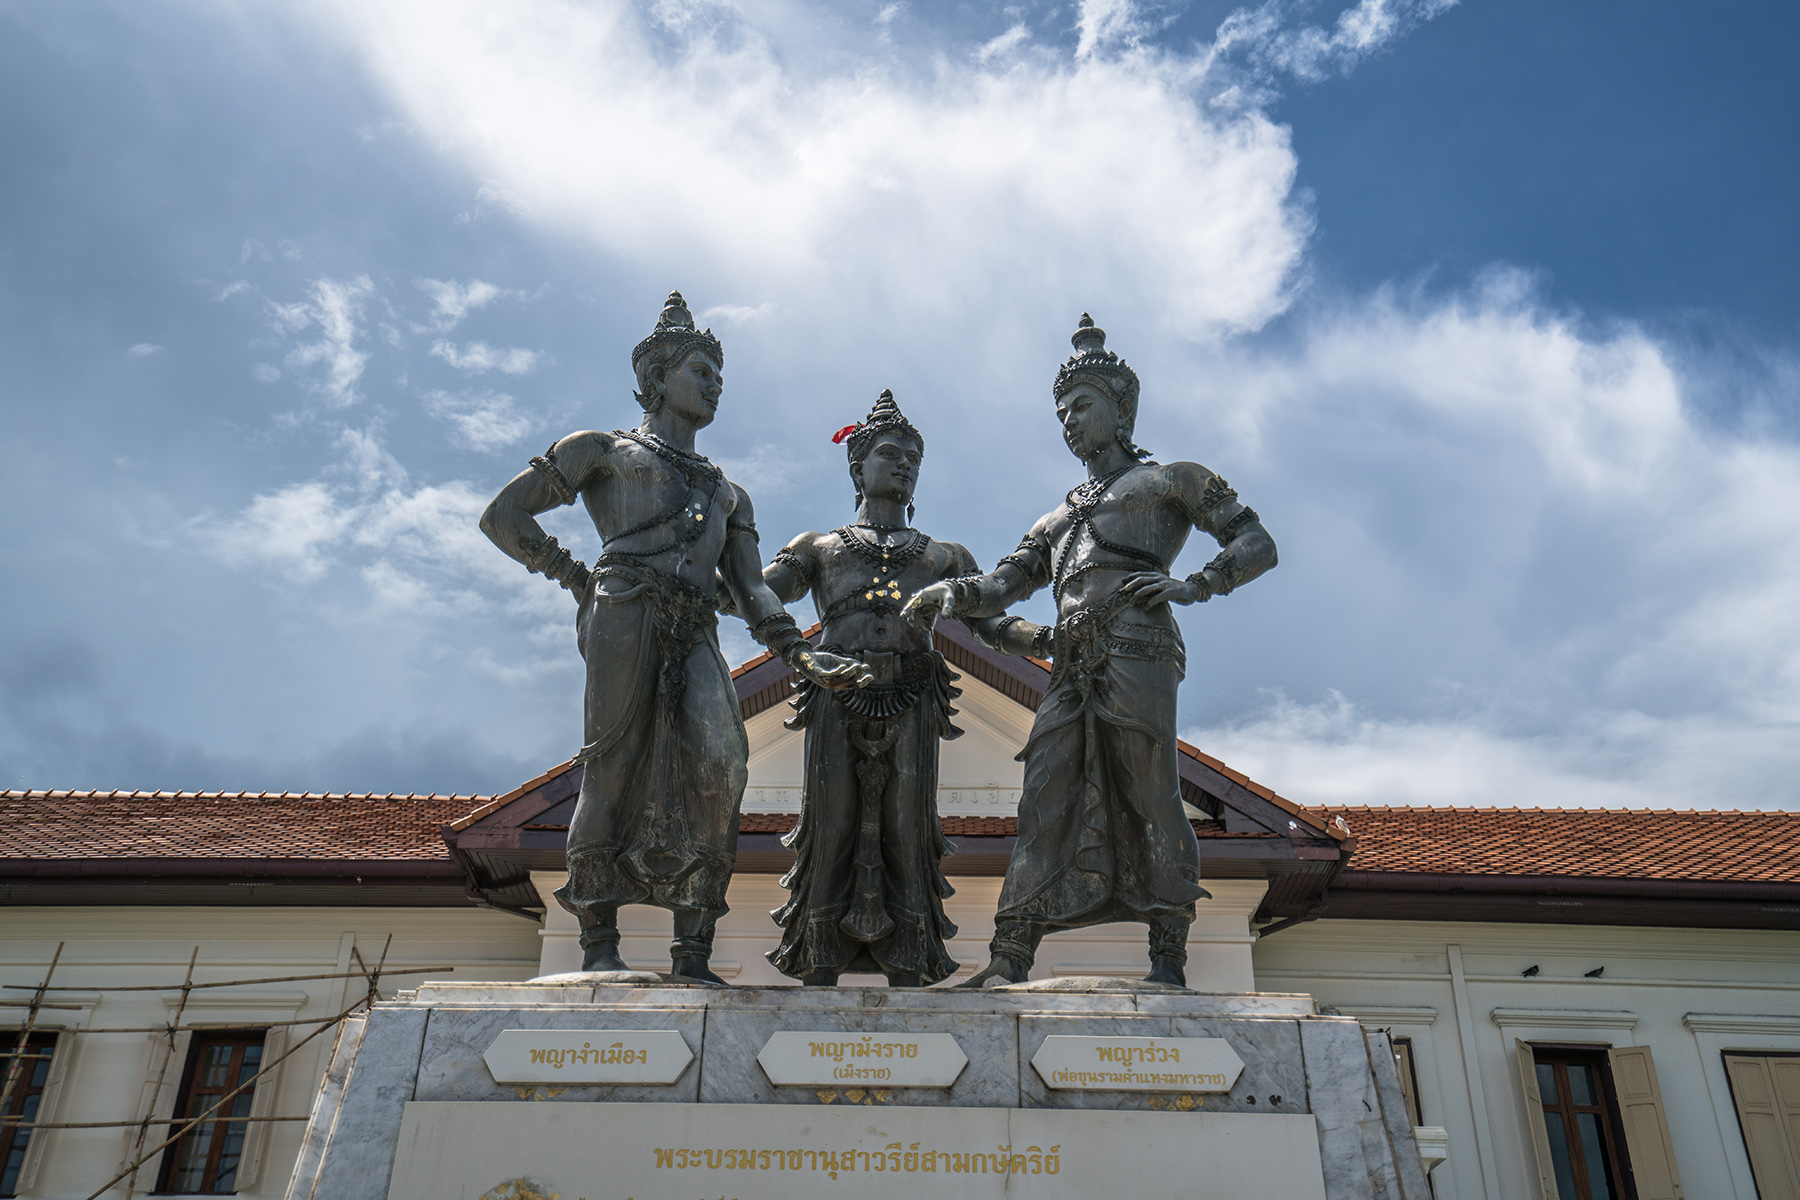 The Three Kings Monument, City Hall in Chiang Mai

